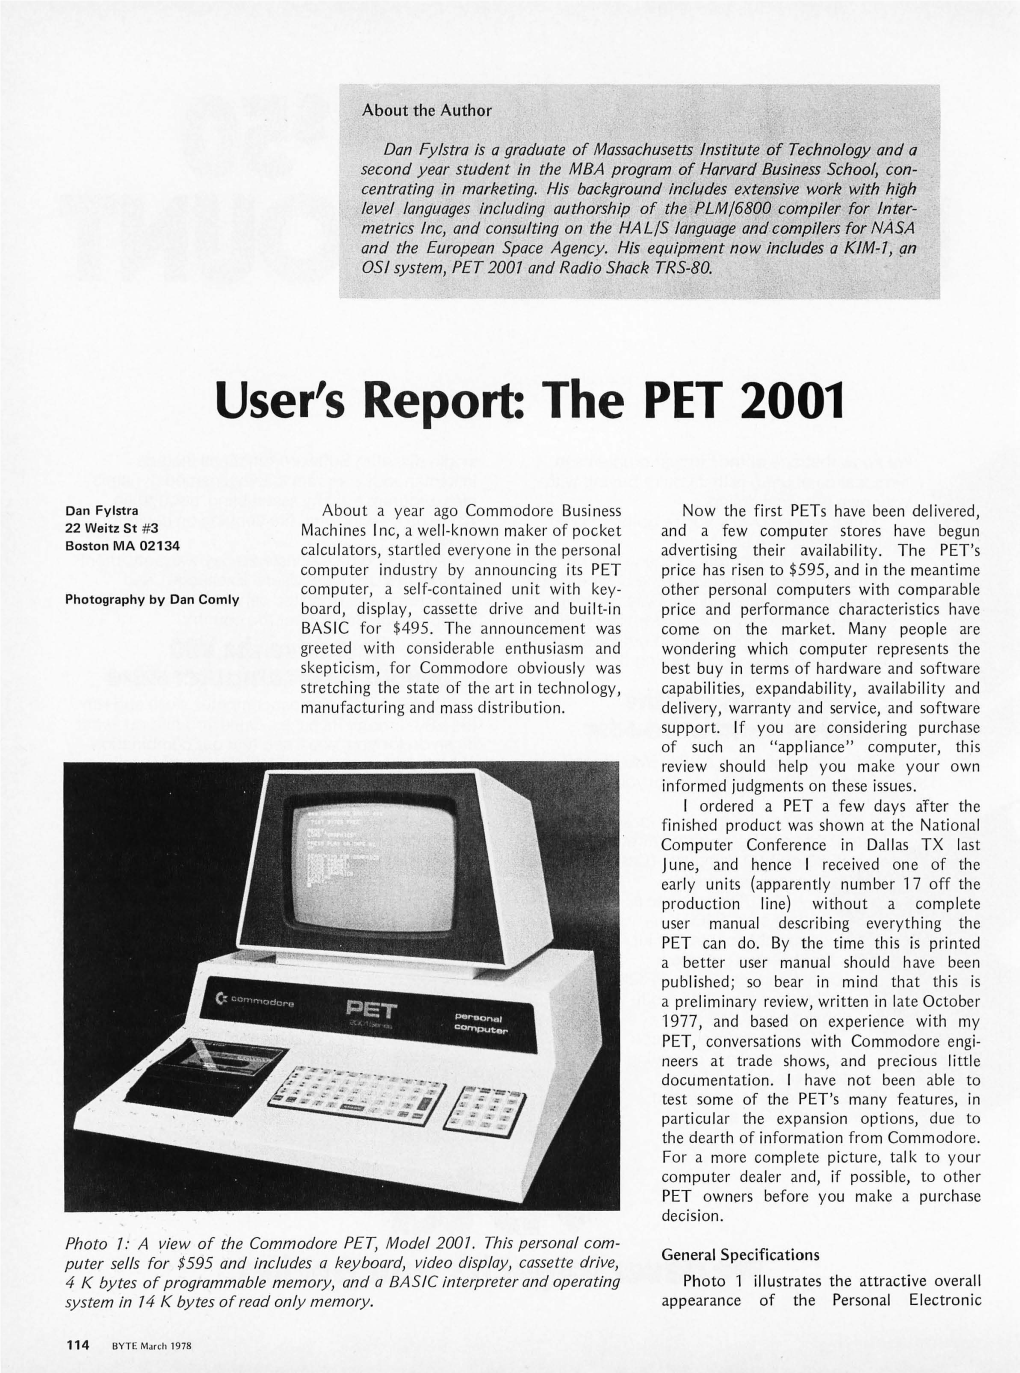 User's Report: the PET 2001, March 1978, BYTE Magazine